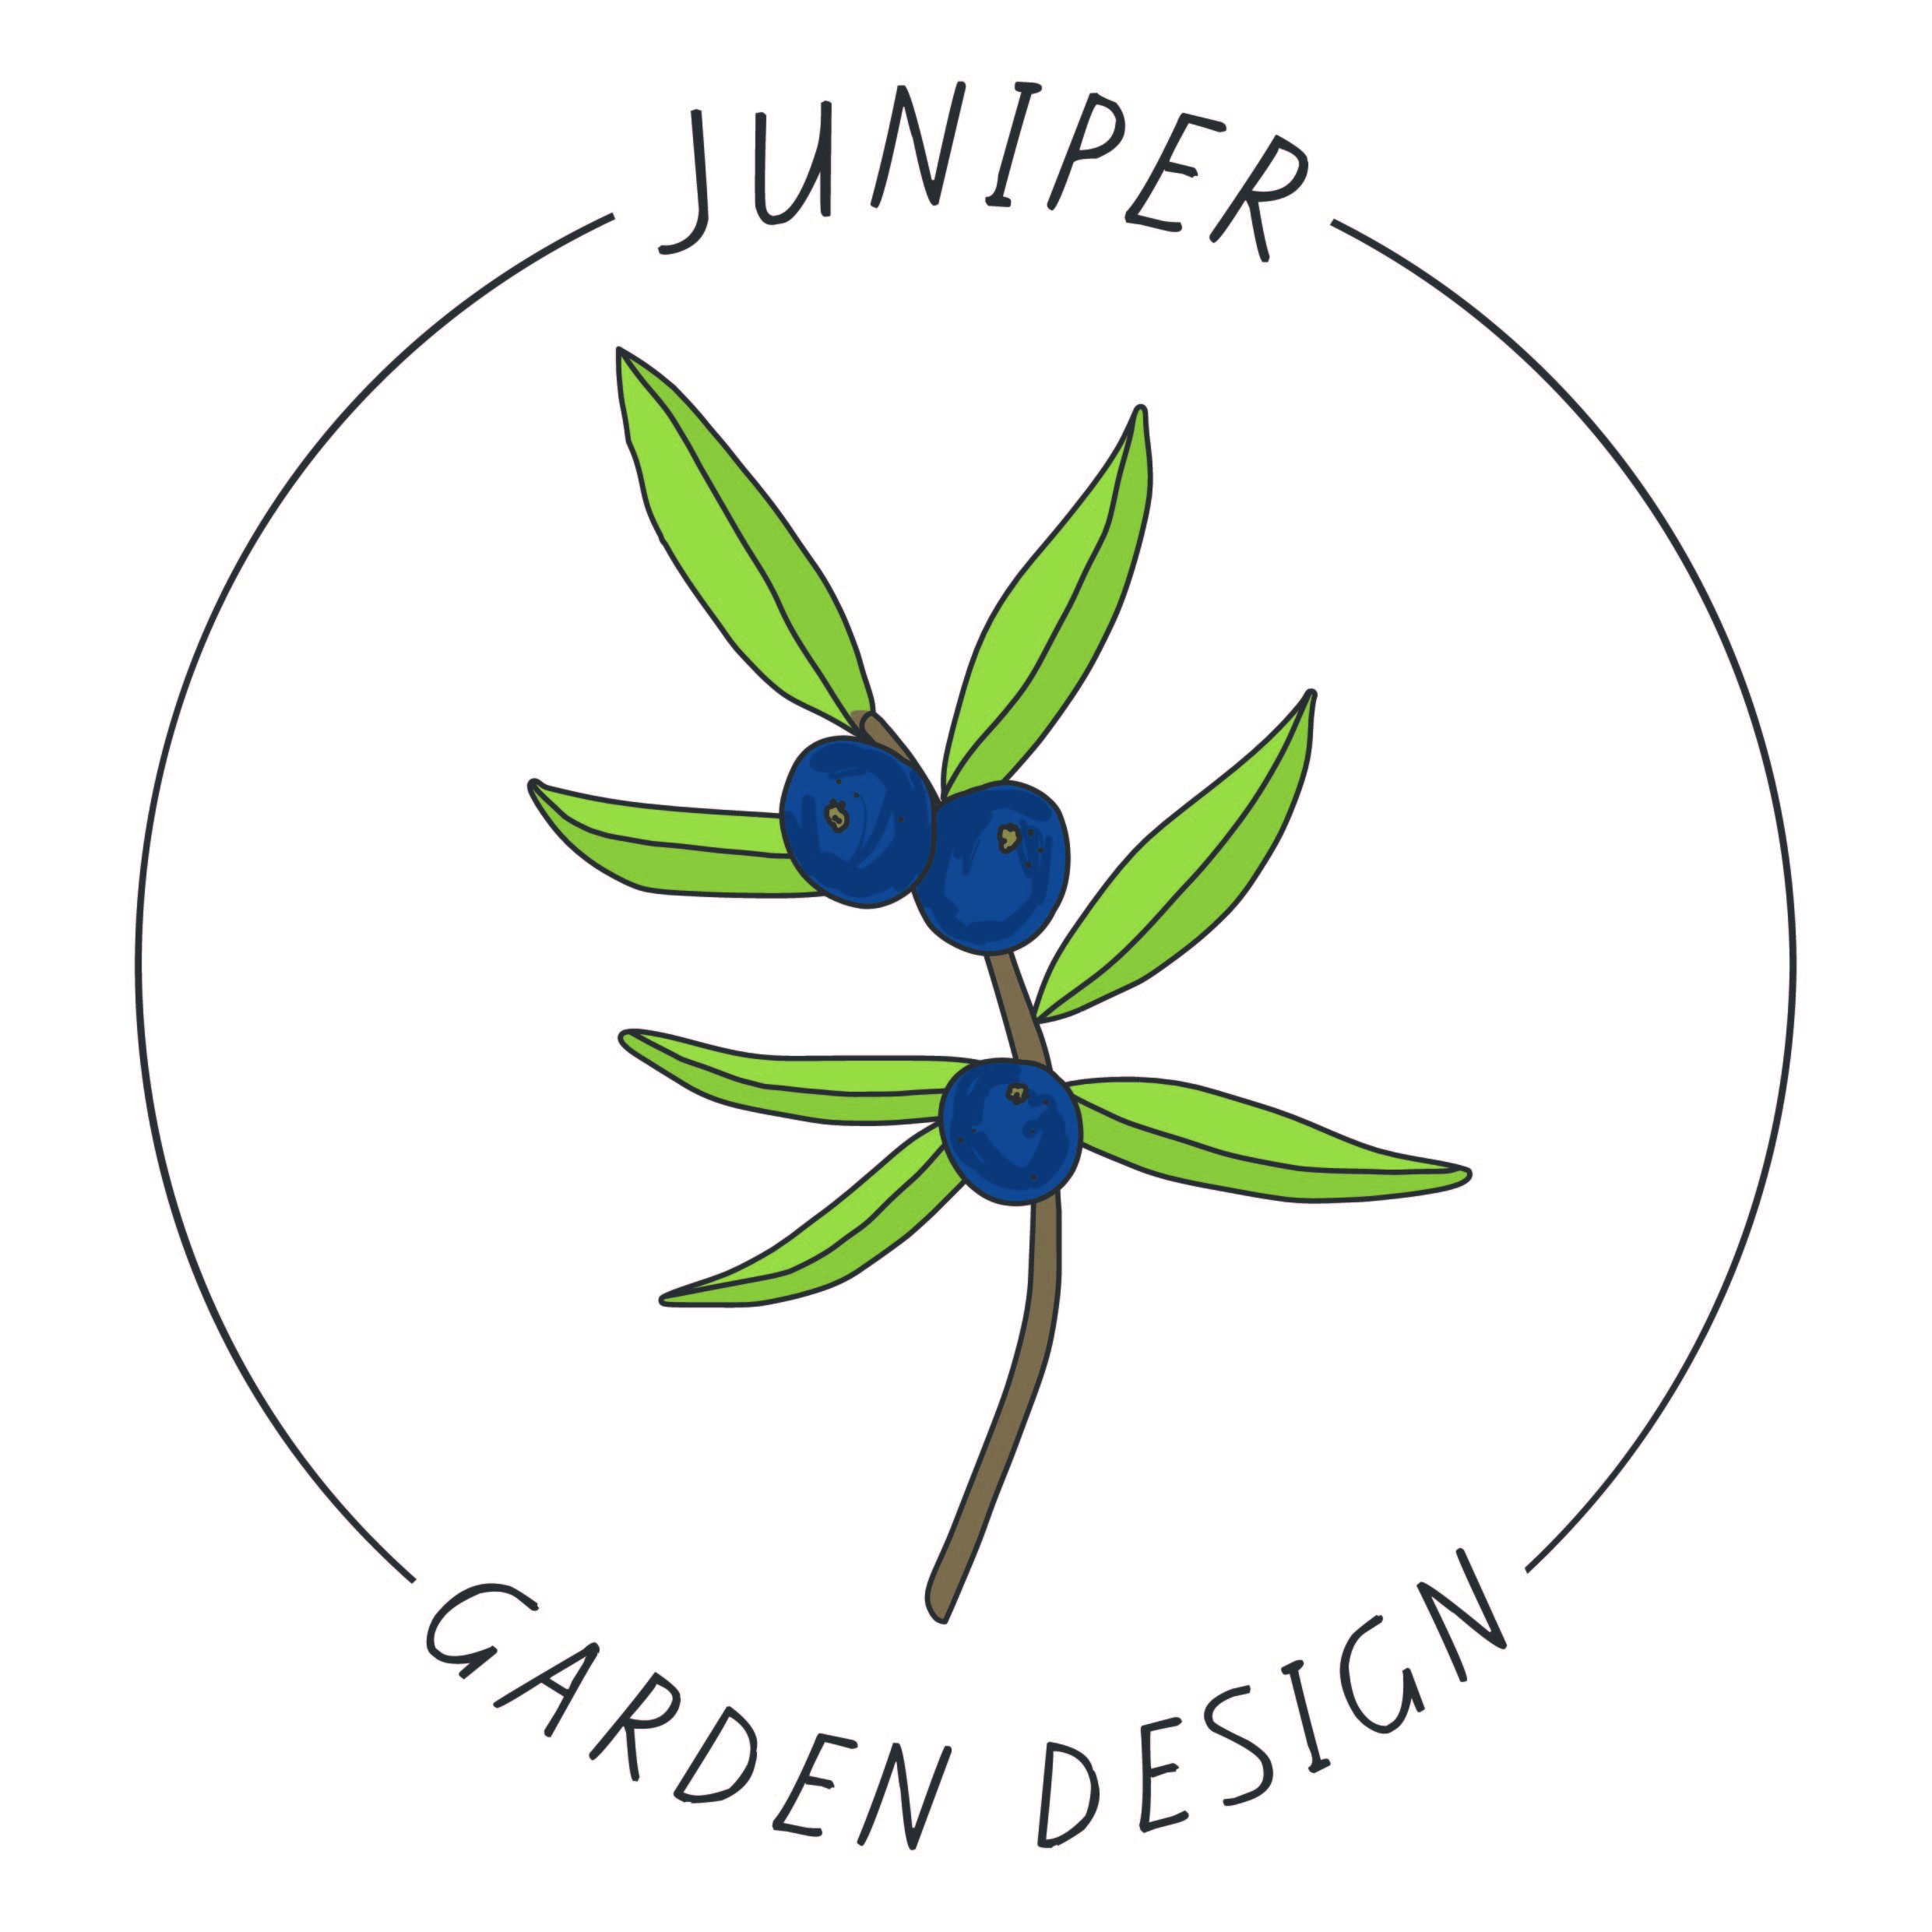 We produce top quality designs for outdoor spaces. Online or 1-1 plans. Attentive. Creative. Innovative. Contact Kaye at admin@junipergardendesign.co.uk #SBS